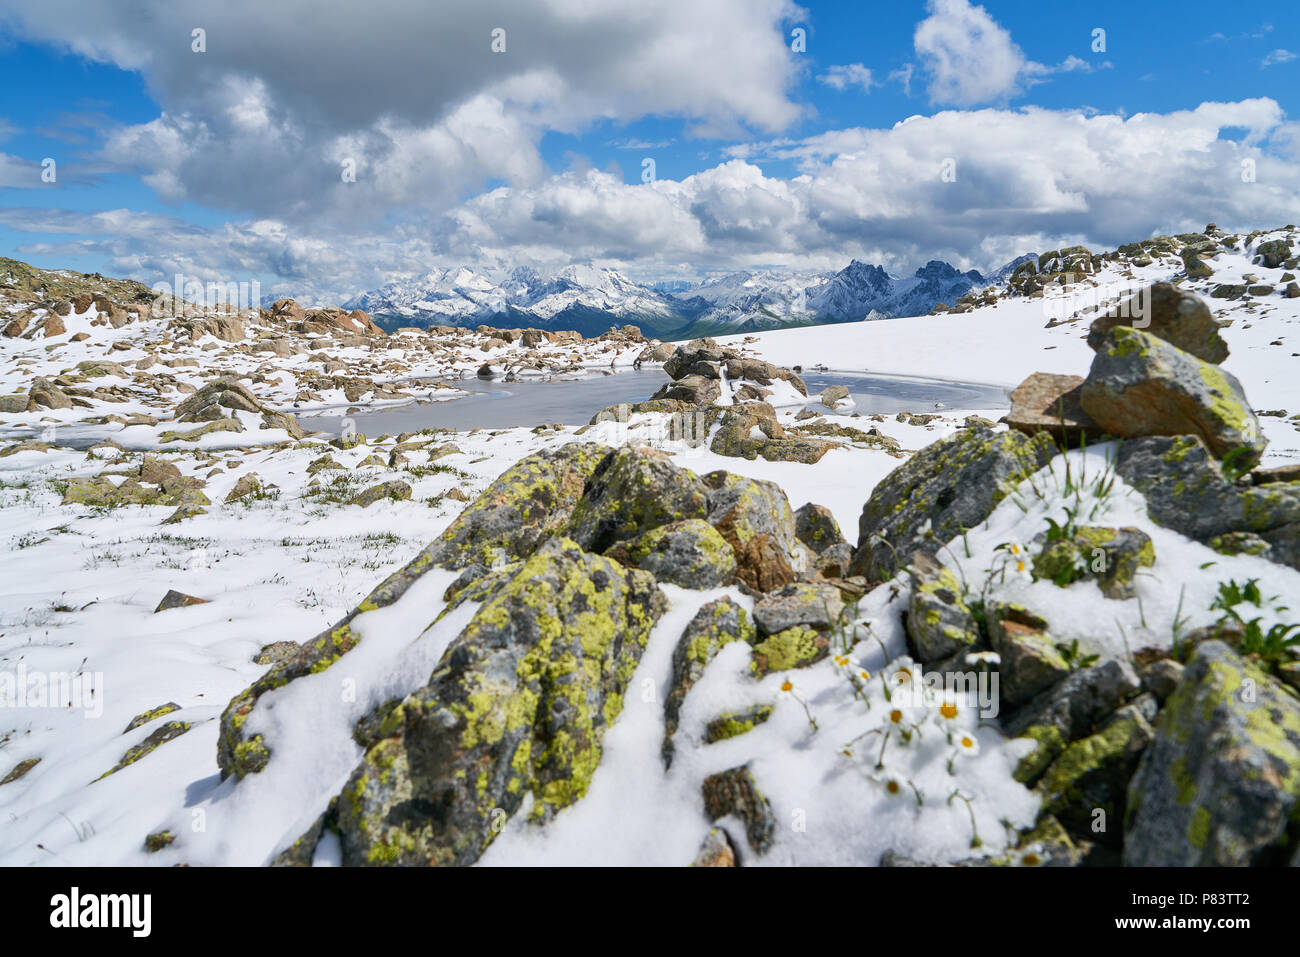 Snow and ice on a summit in the French Alps mountains Stock Photo